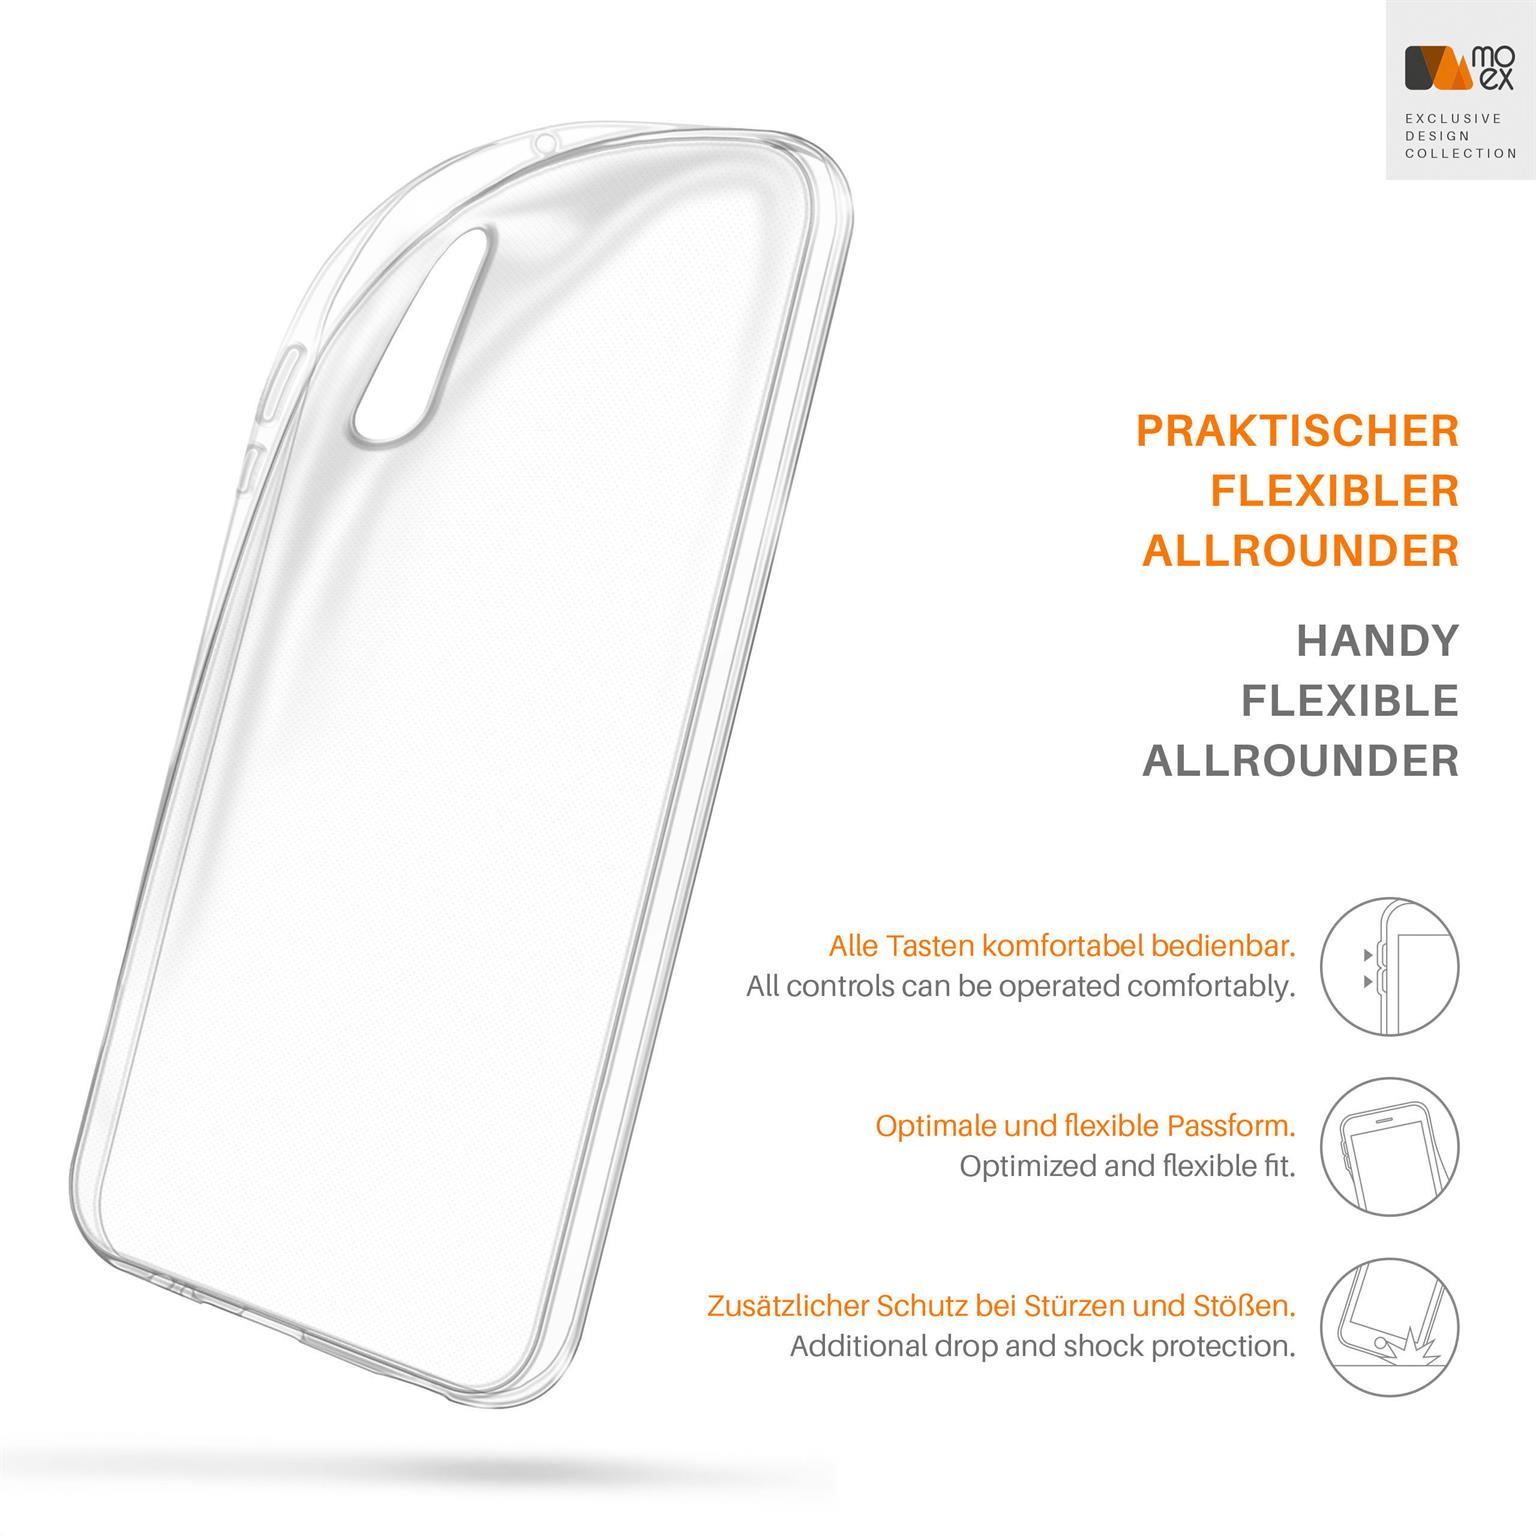 MOEX Aero Backcover, 9X Crystal-Clear Honor, Case, Pro